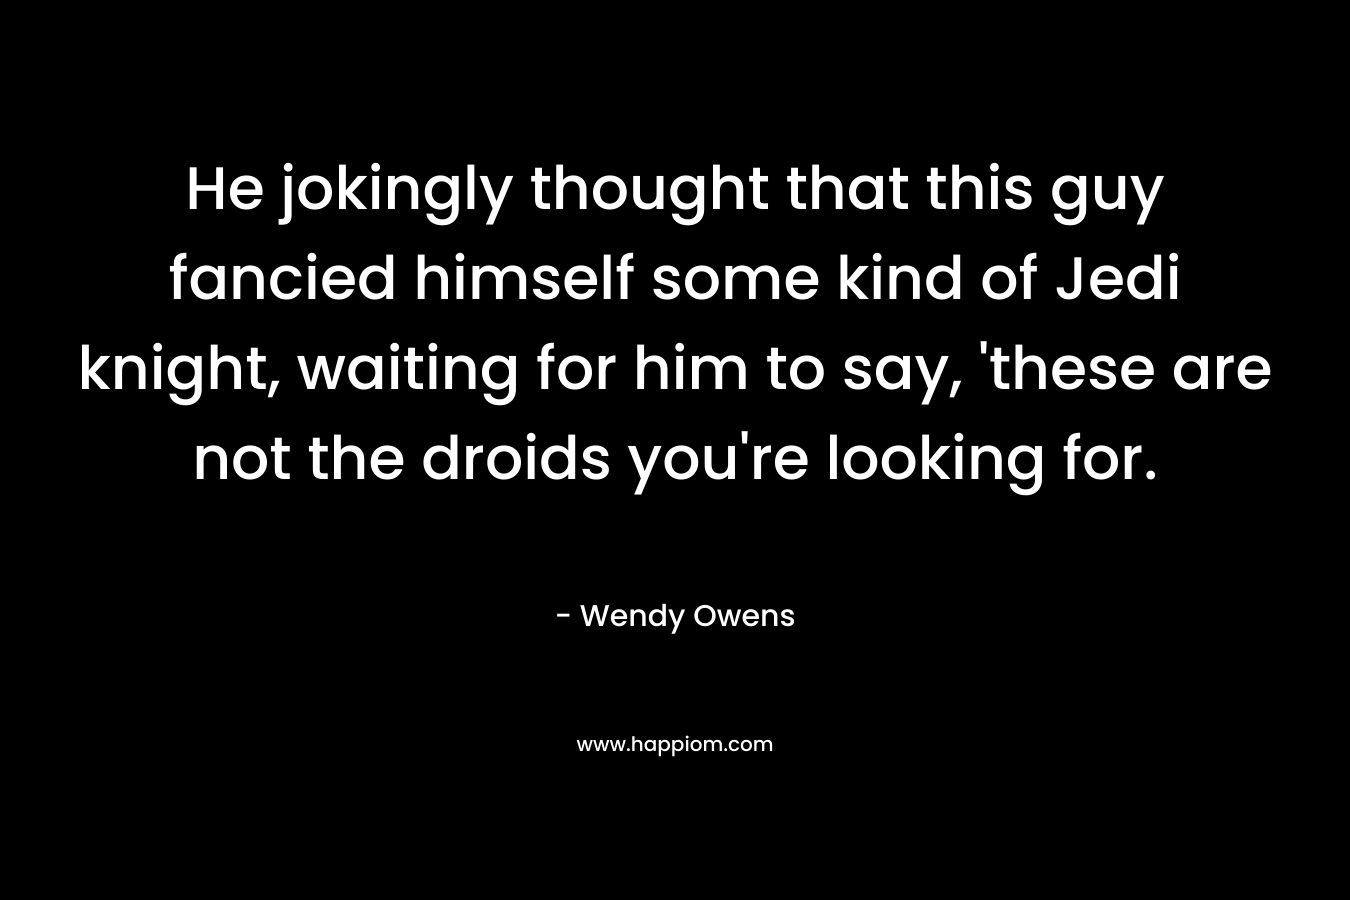 He jokingly thought that this guy fancied himself some kind of Jedi knight, waiting for him to say, ‘these are not the droids you’re looking for. – Wendy Owens